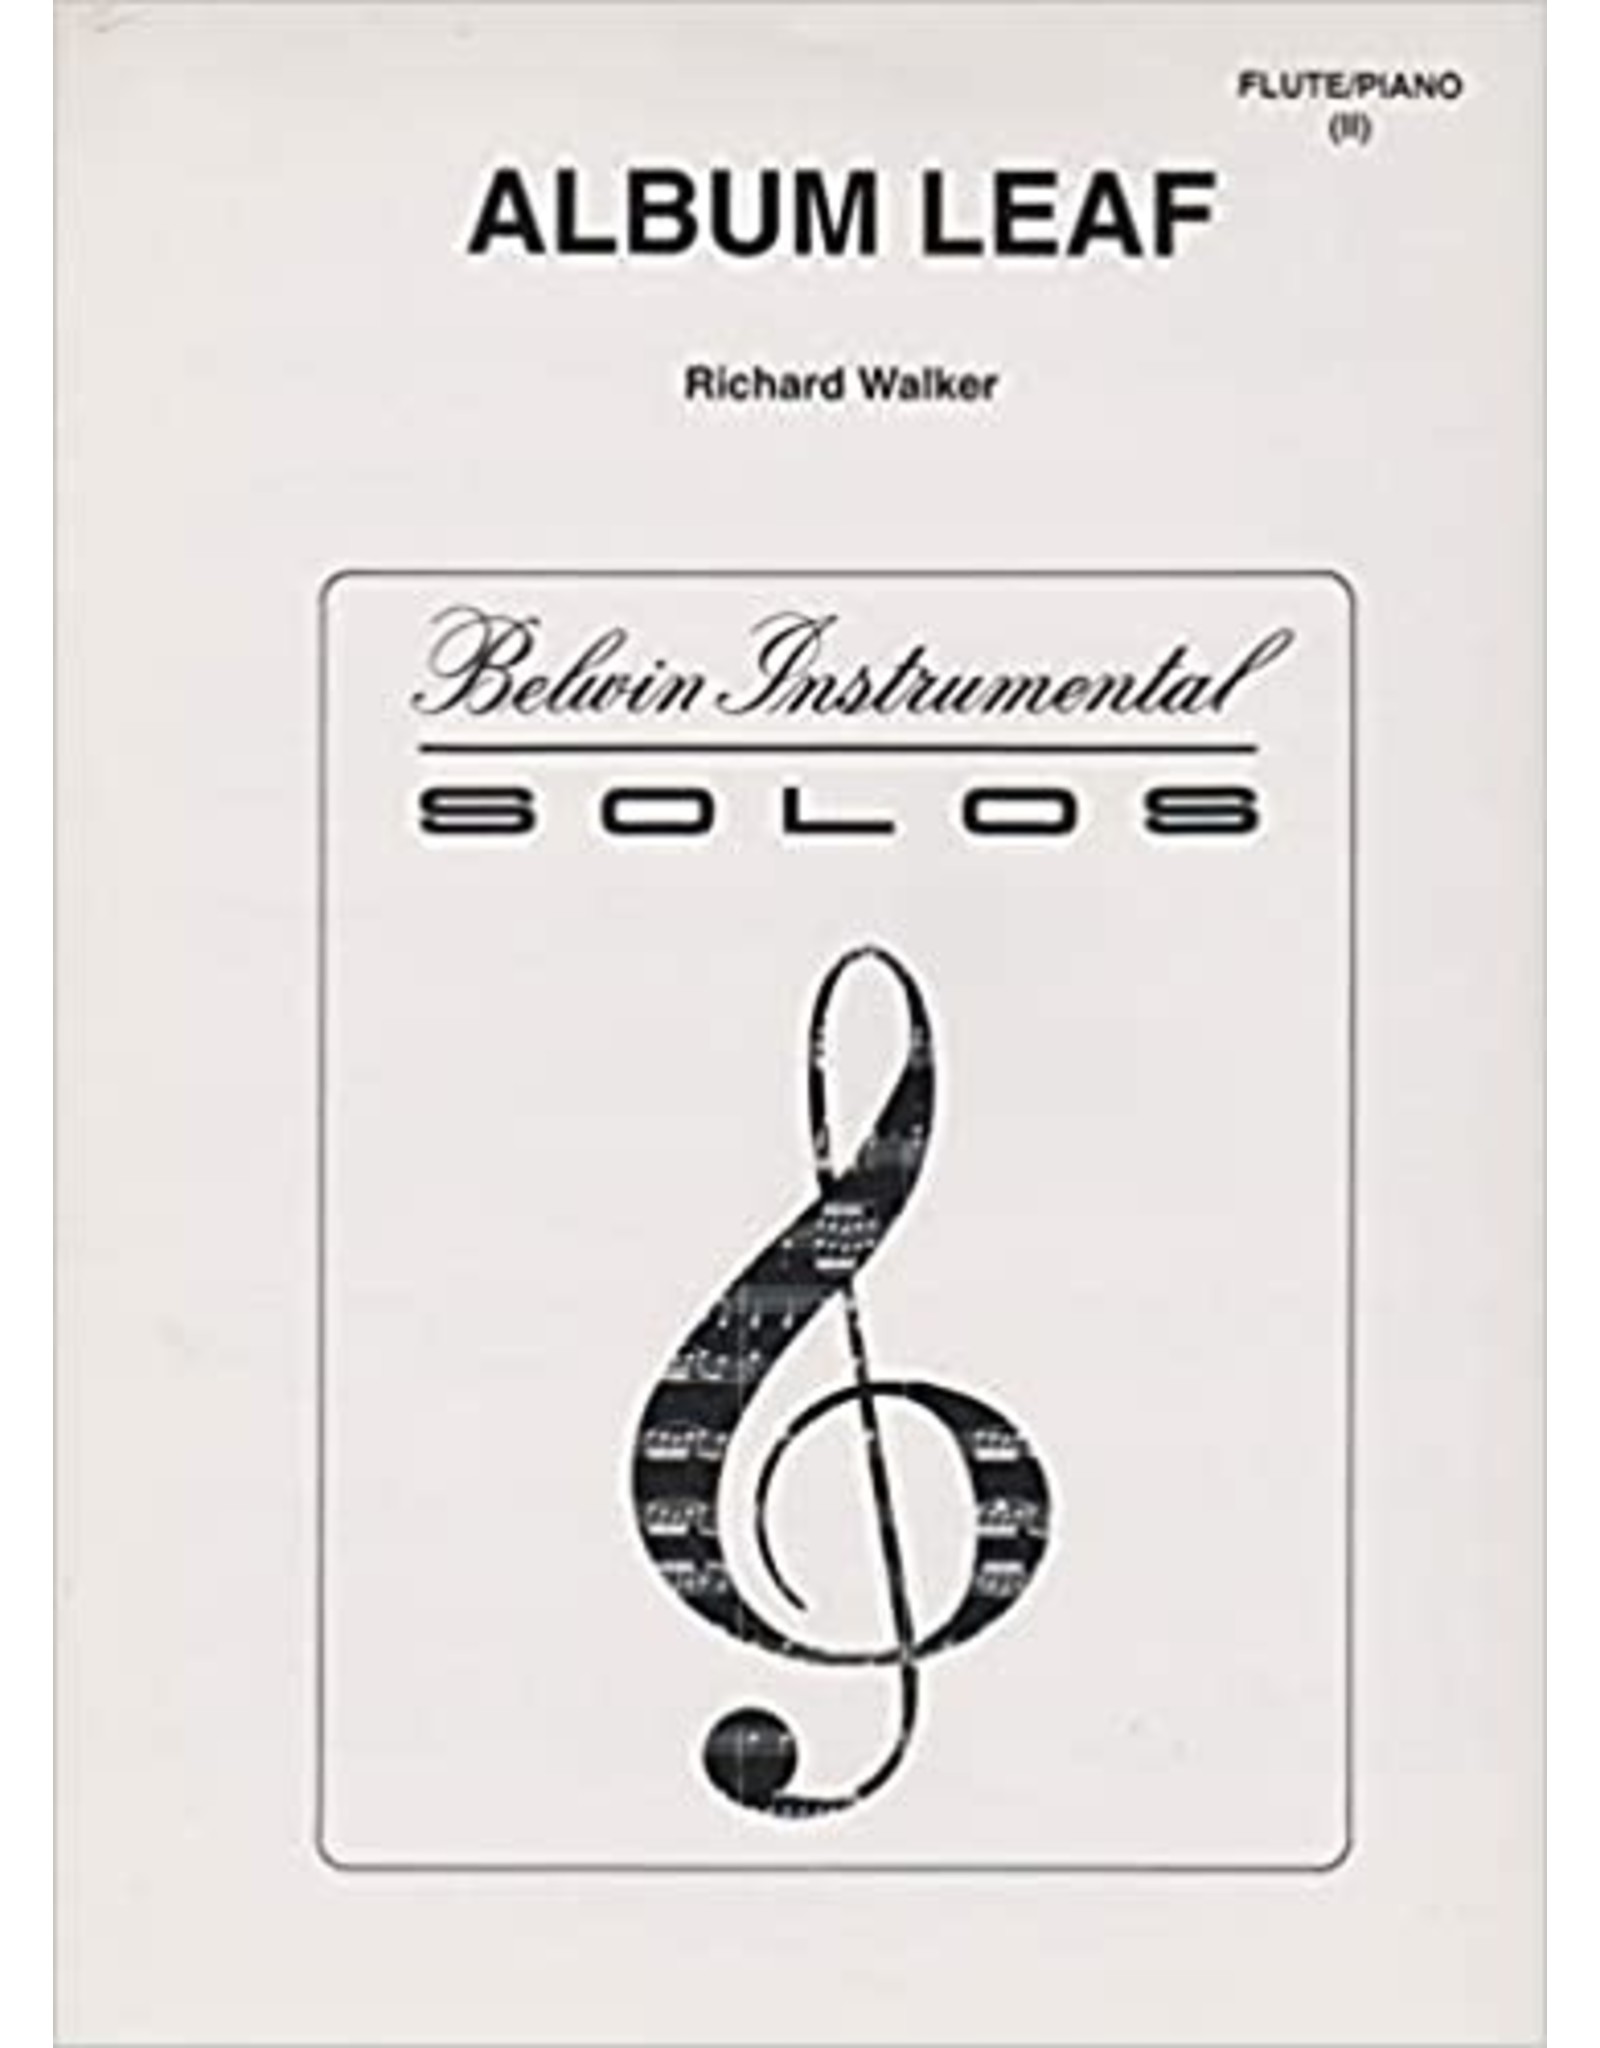 Alfred Walker - Album Leaf for Flute and Piano